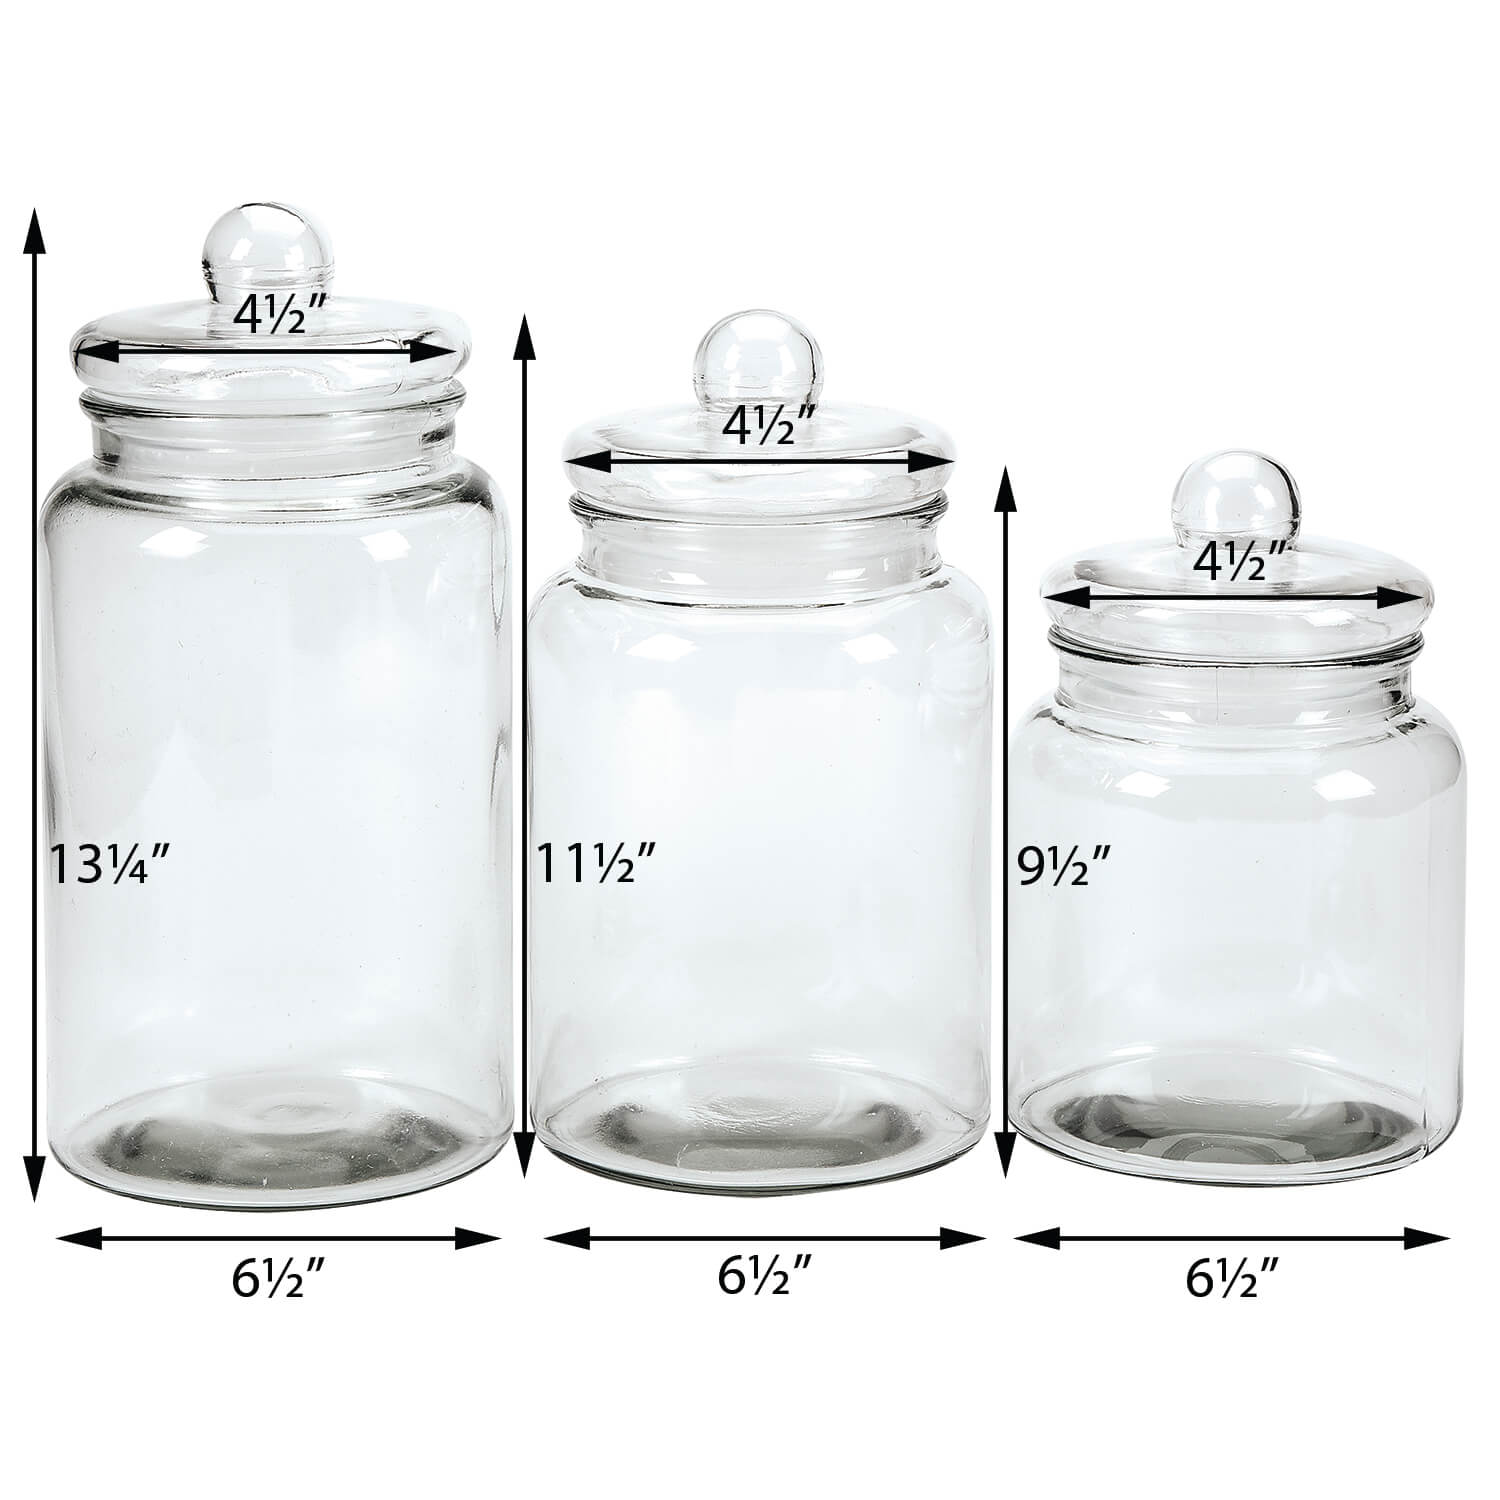 Glass Apothecary Jars With Lids Decorative Display Canisters Clear Storage 842536182900 Ebay